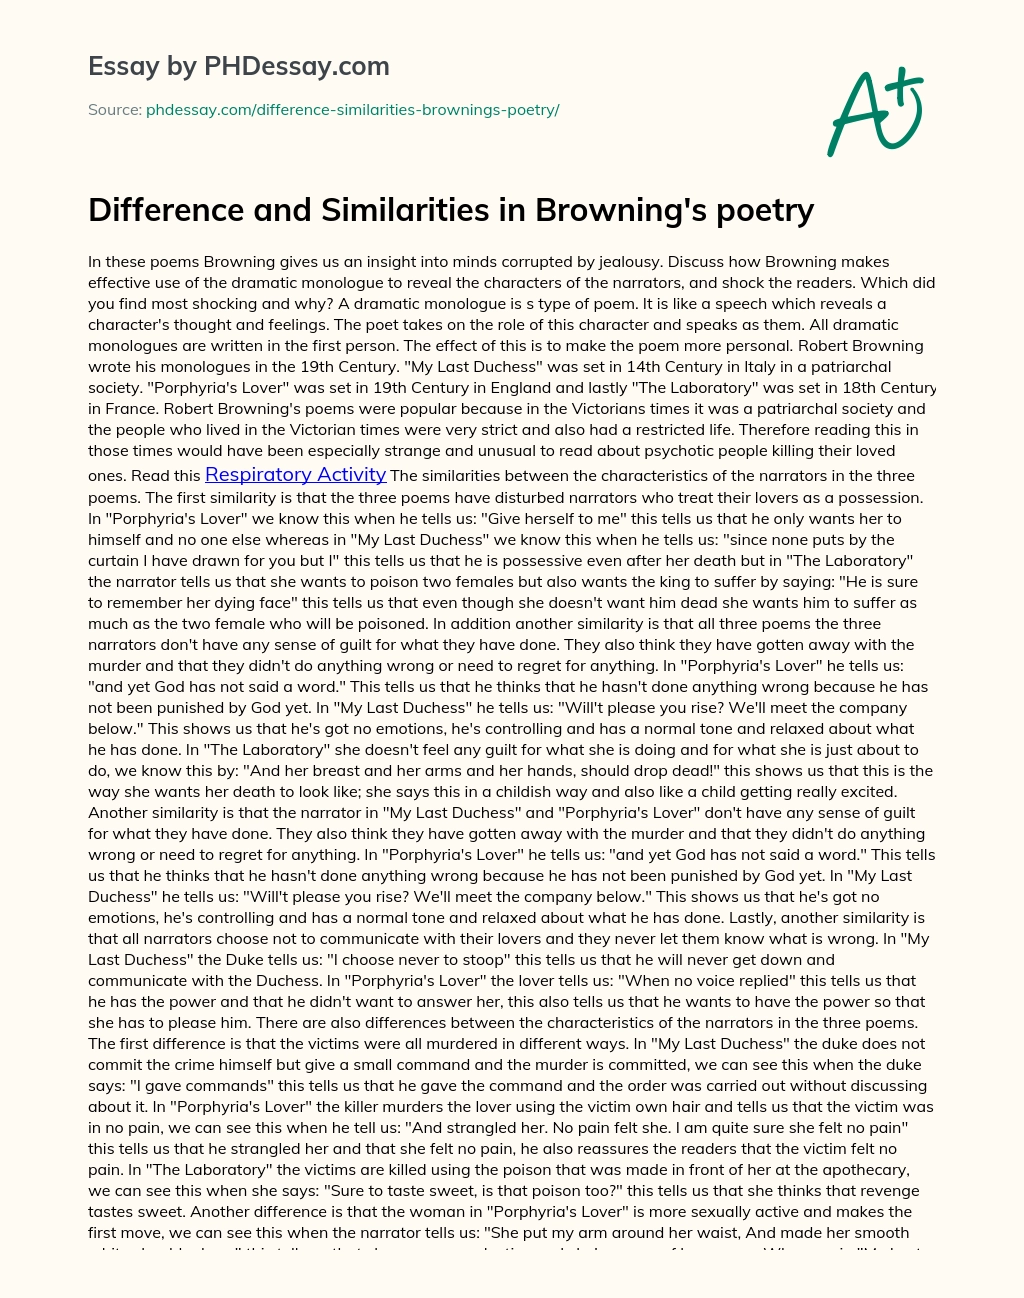 Difference and Similarities in Browning’s poetry essay